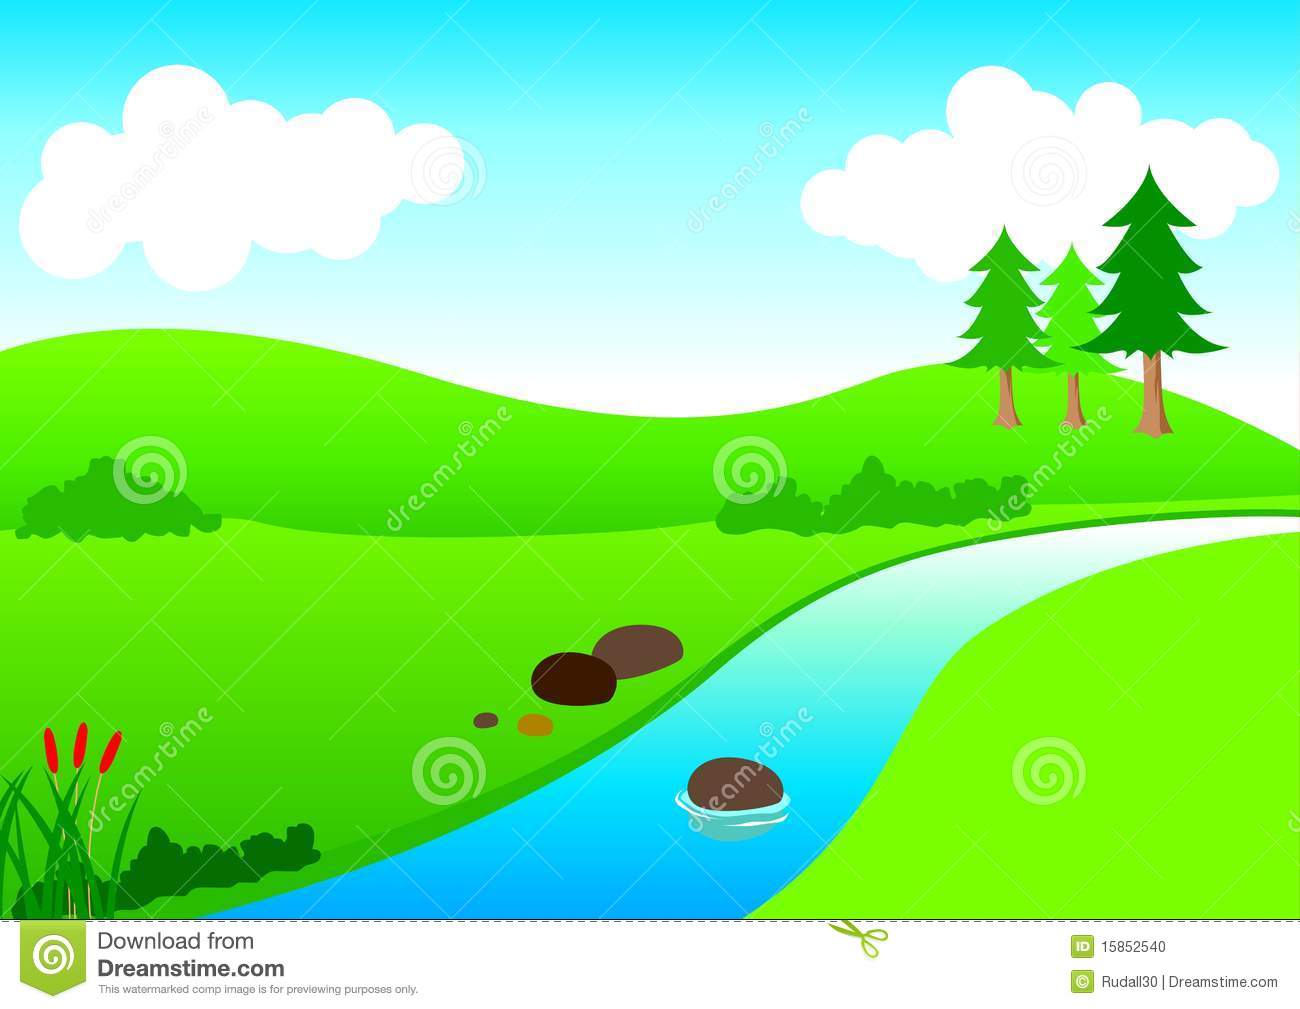 Stock Illustration Of A River And Mountain In Cartoon Style